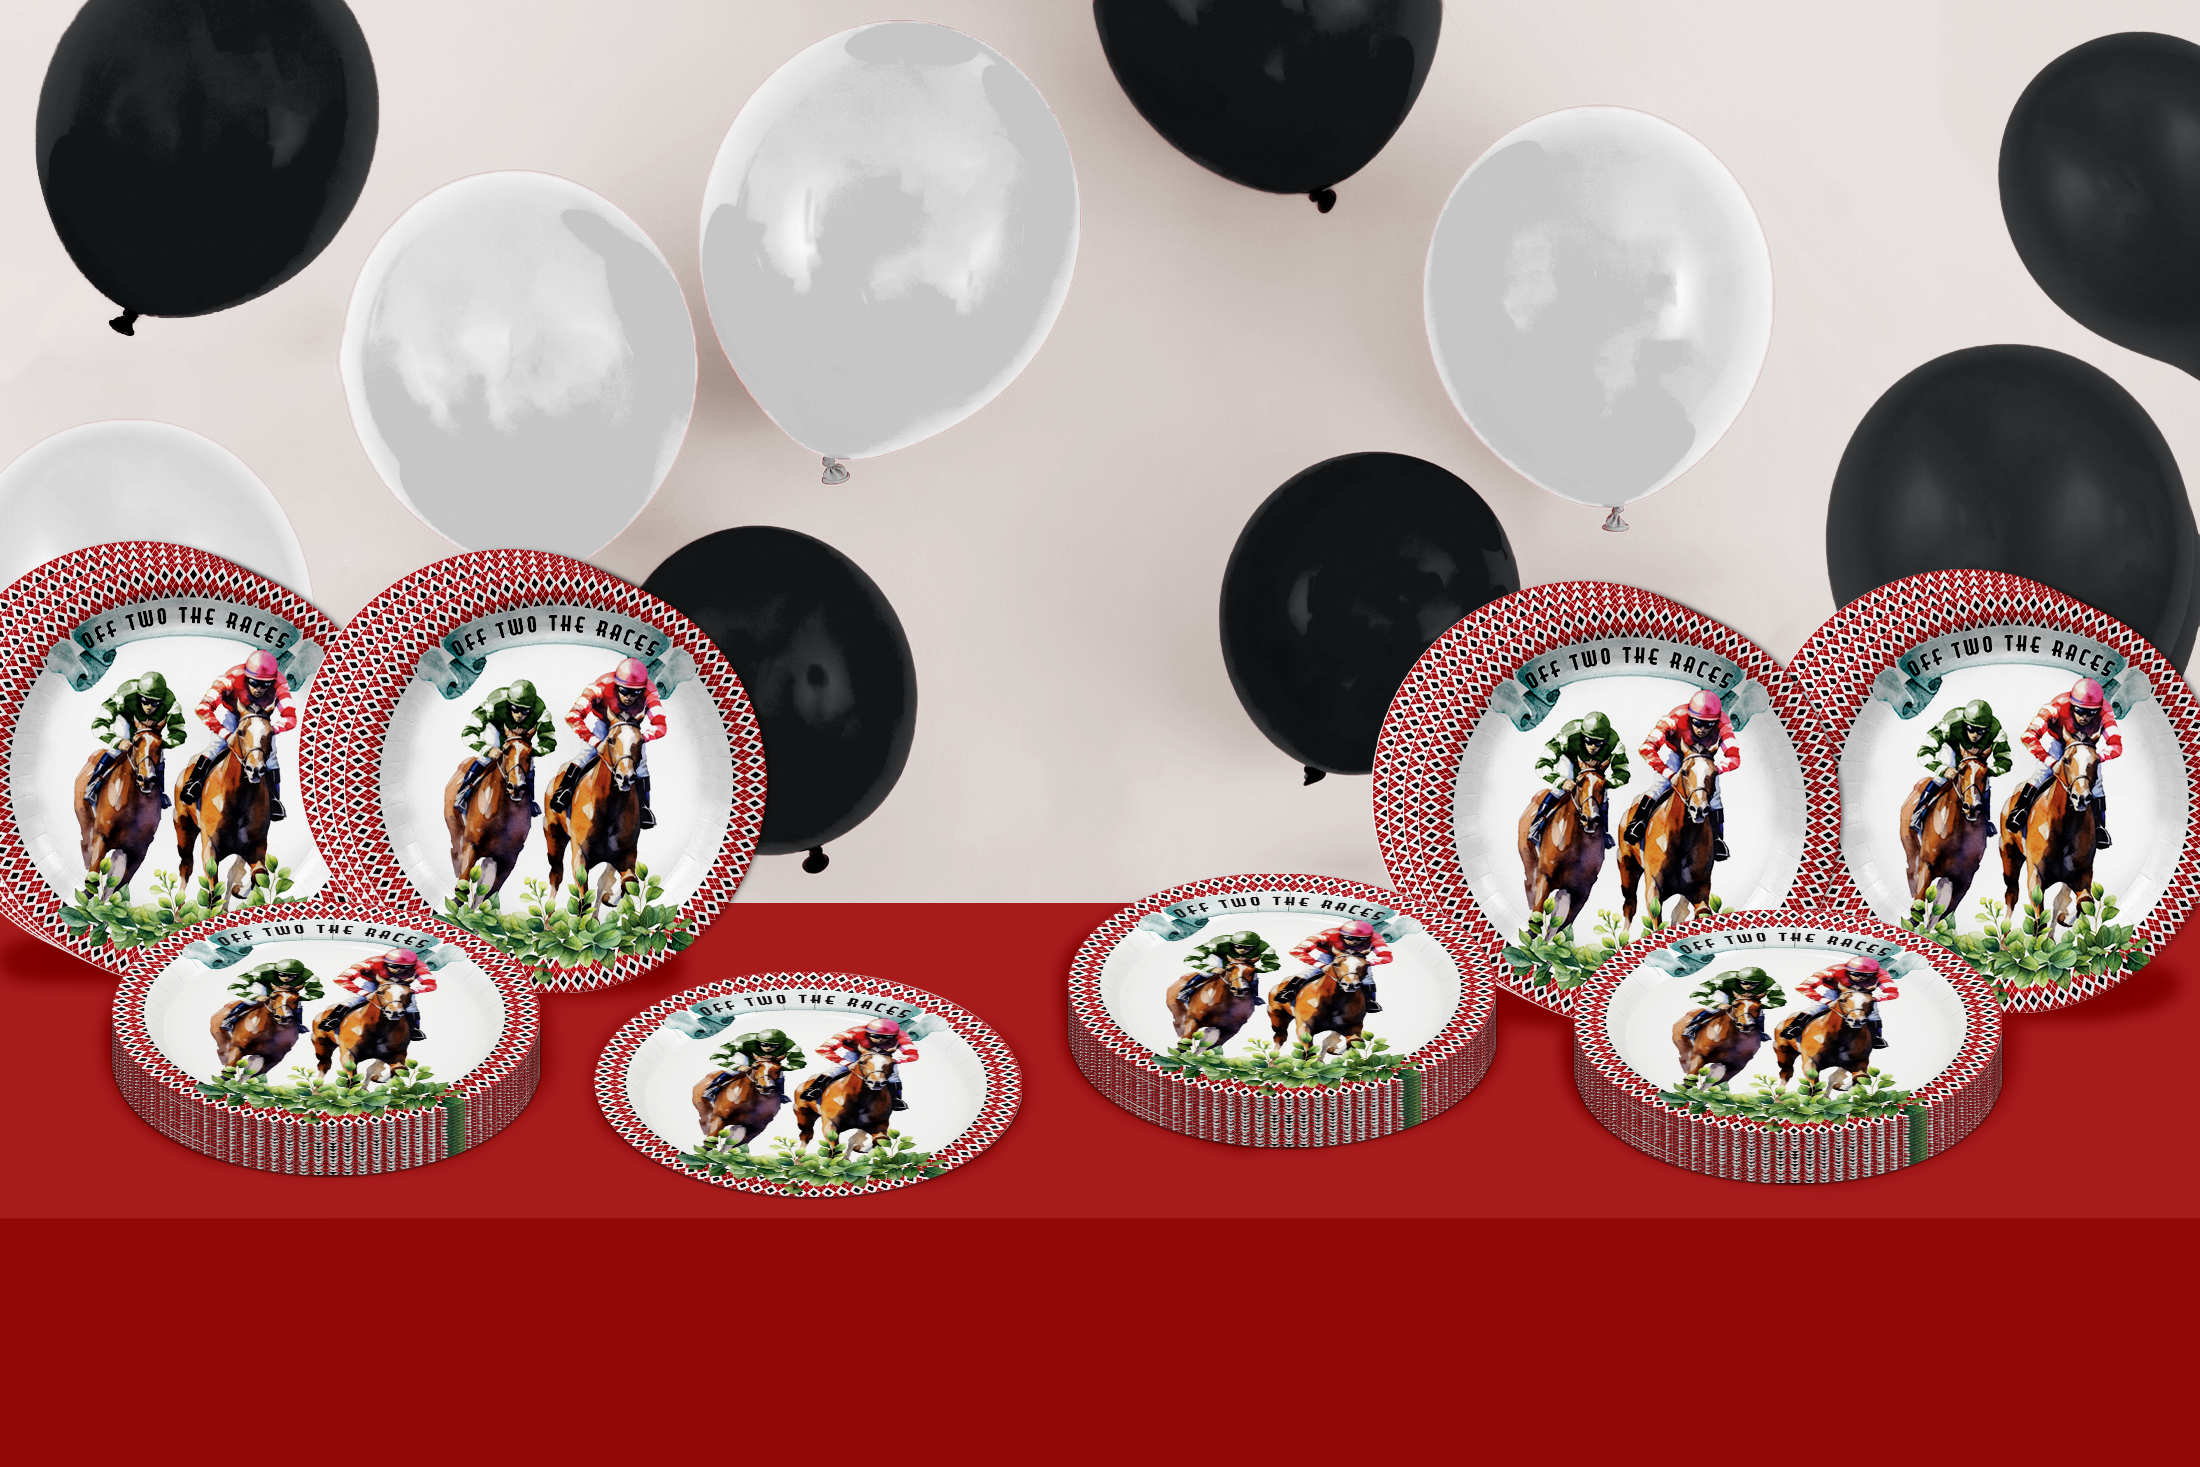 Off Two the Races 2nd Birthday Party Supplies Large 9" Paper Plates in Bulk 32 Piece